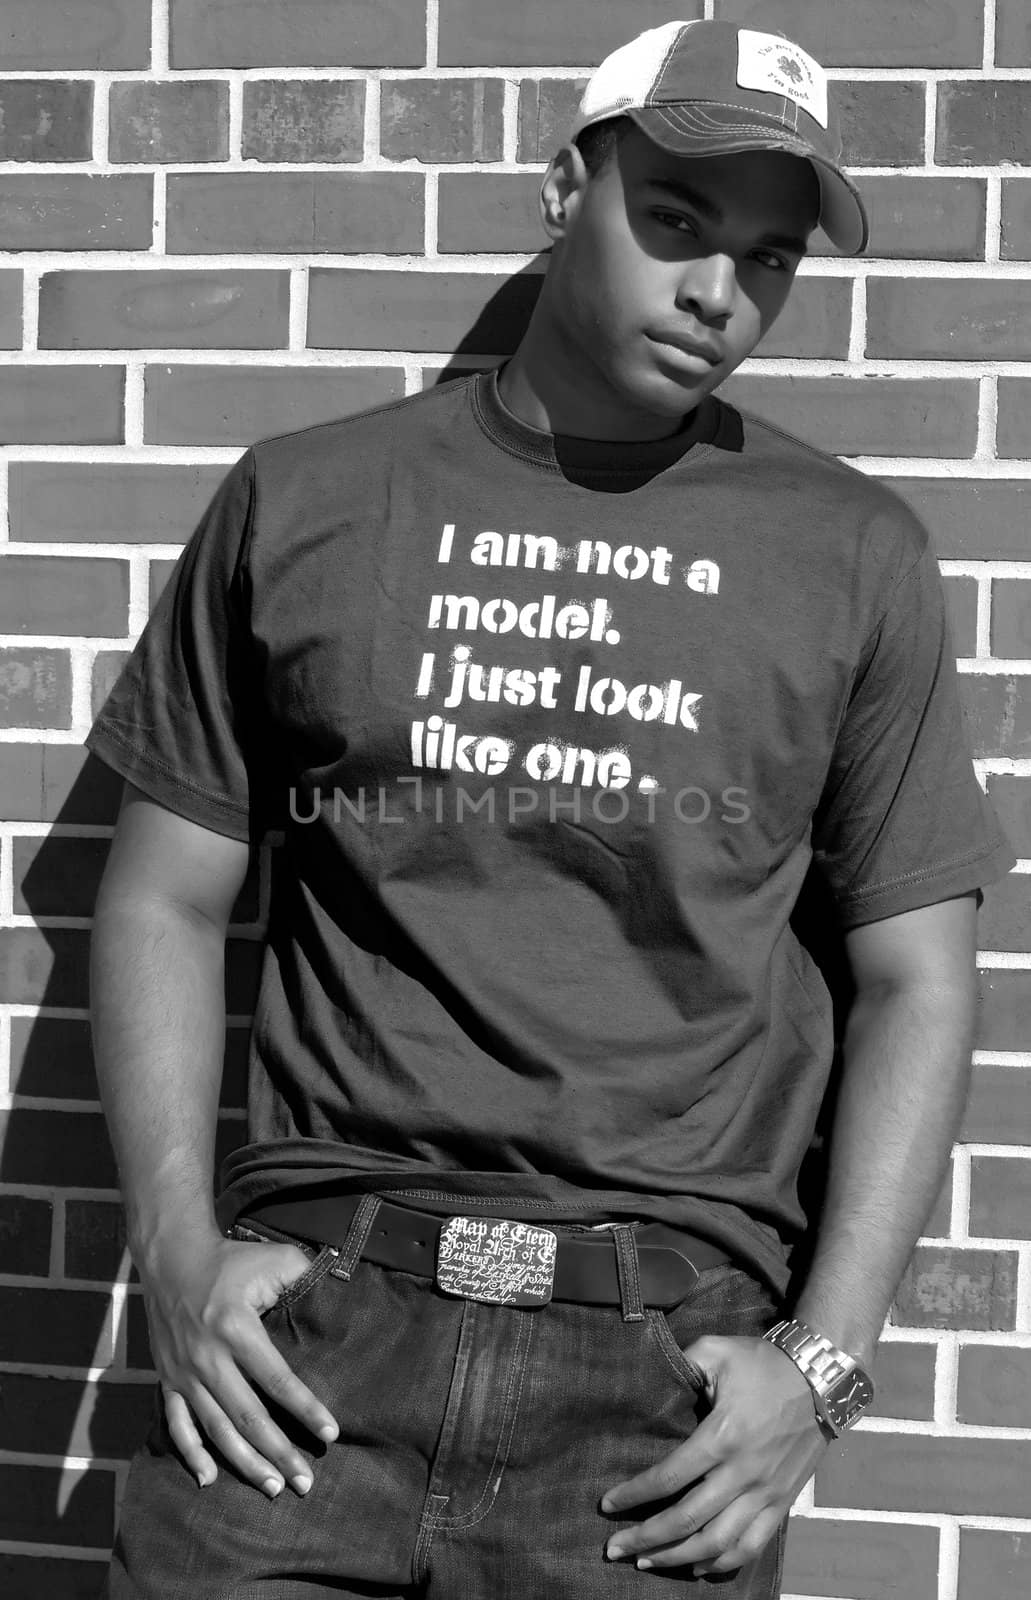 Attractive young African American male playing posing in a t-shirt and jeans against a brick wall.